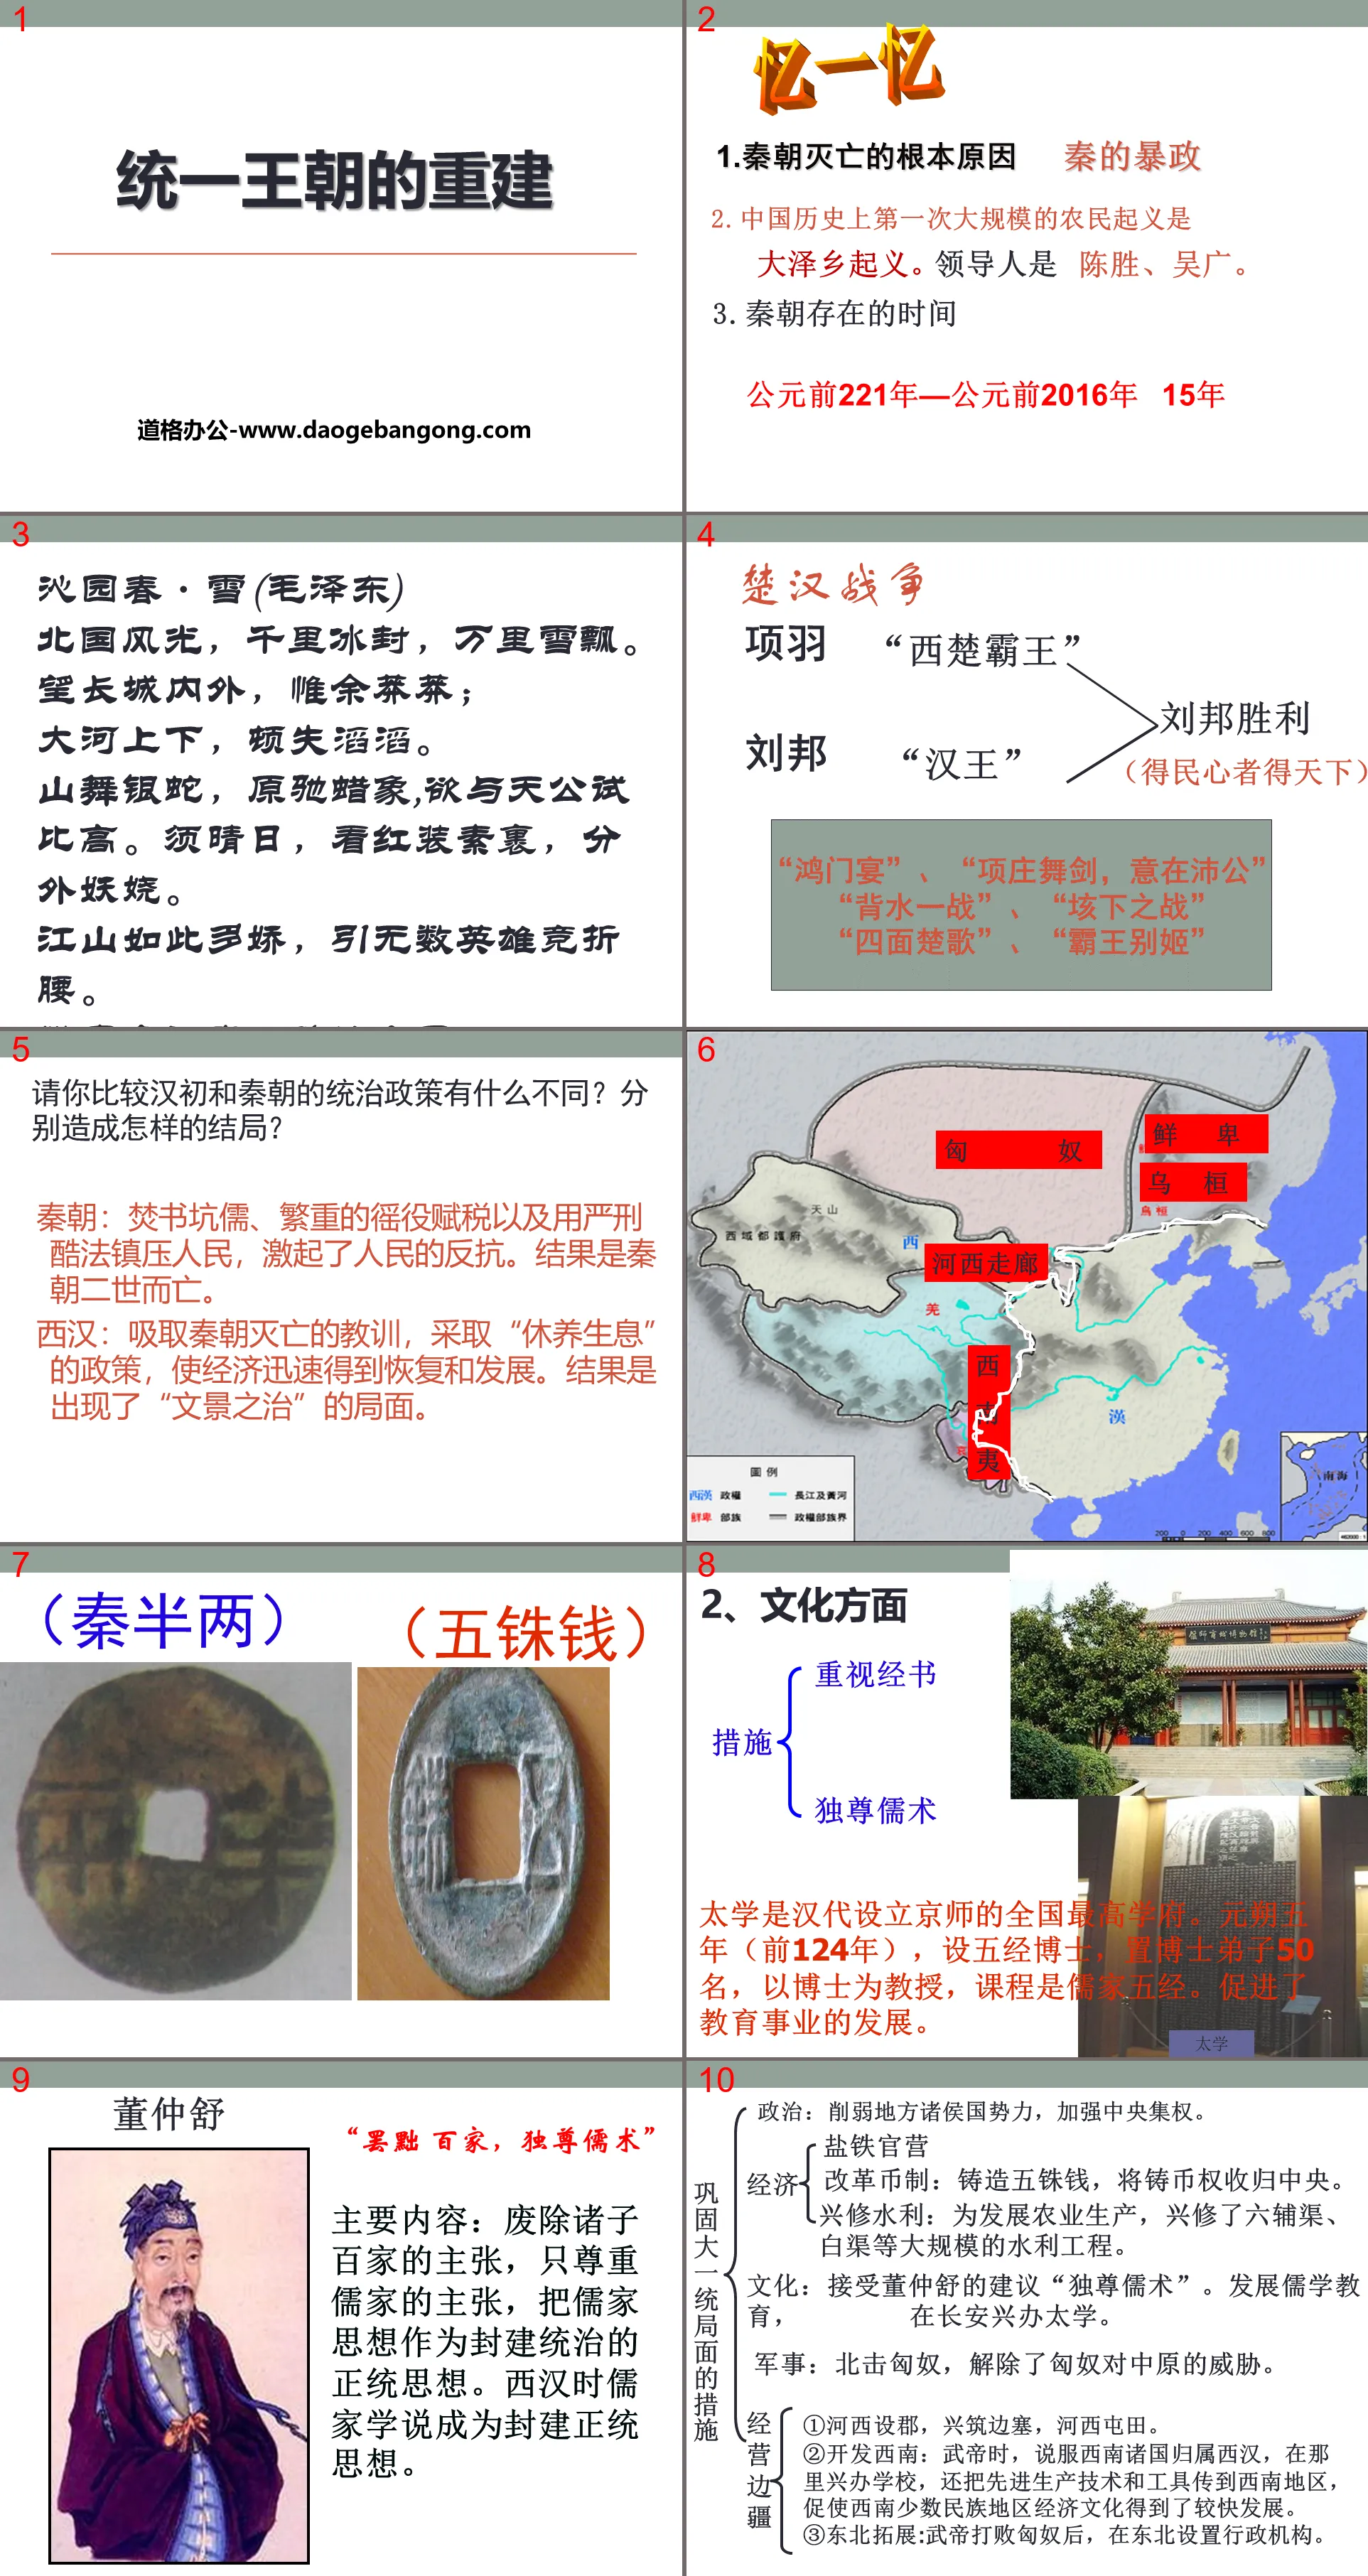 "Reconstruction of the Unified Dynasty" PPT courseware 2 during the Qin and Han Dynasties